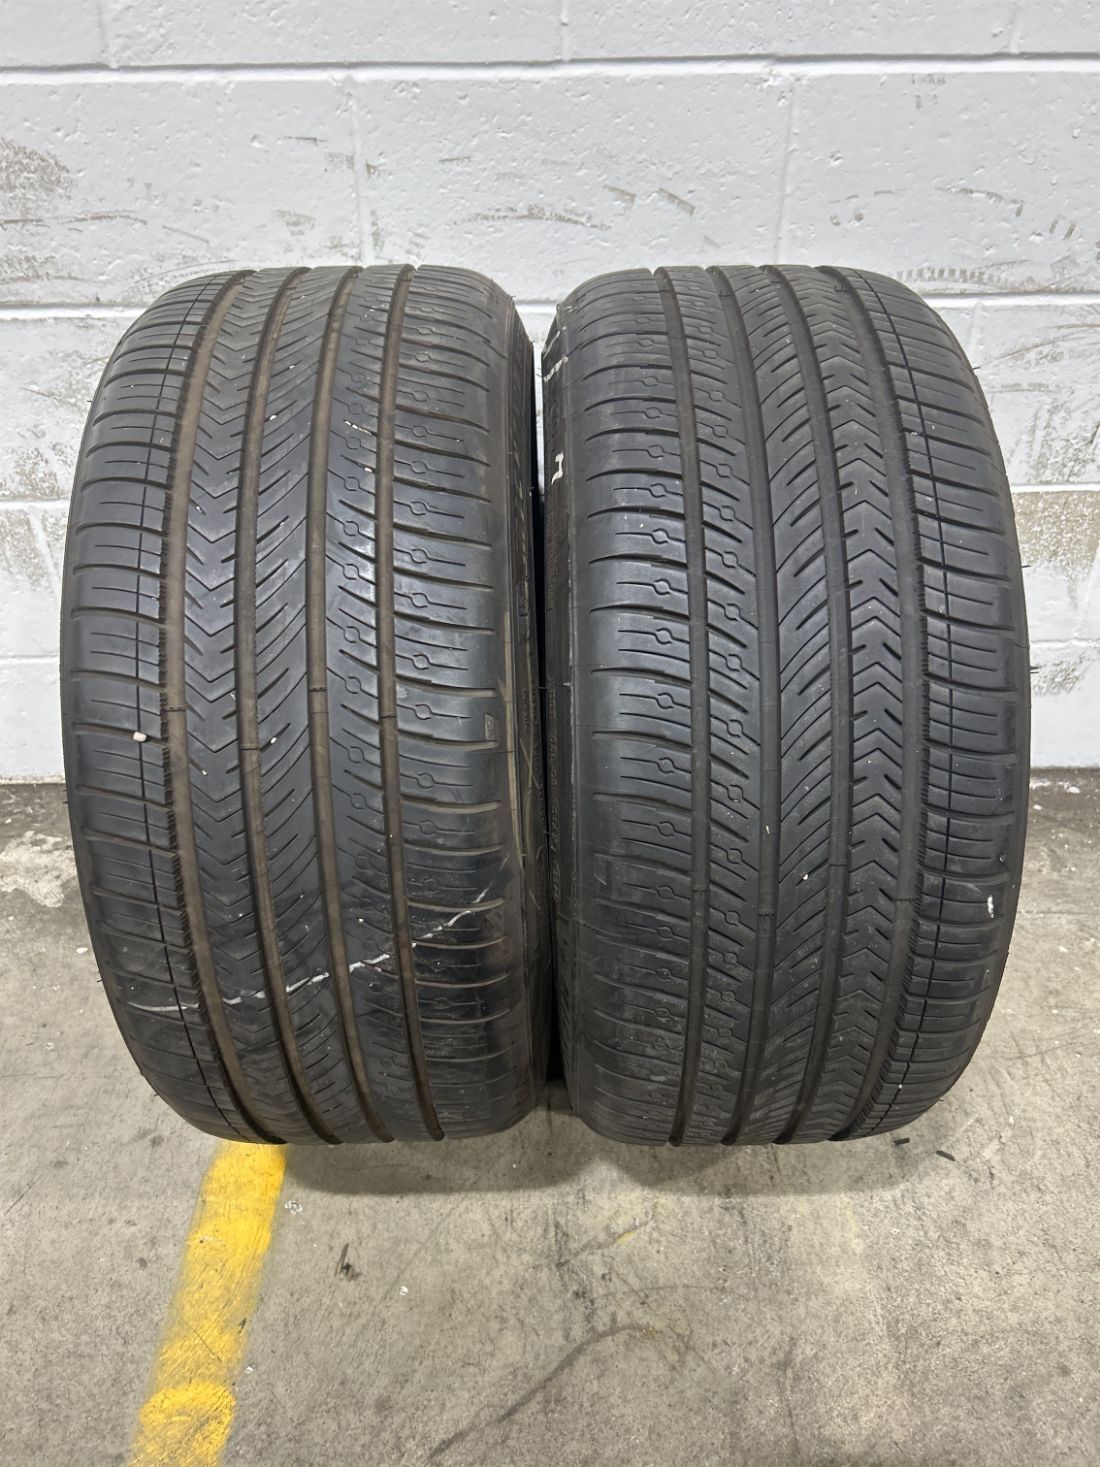 2x P275/35R21 Michelin Pilot Sport A/S 4 TO 8/32 Used Tires